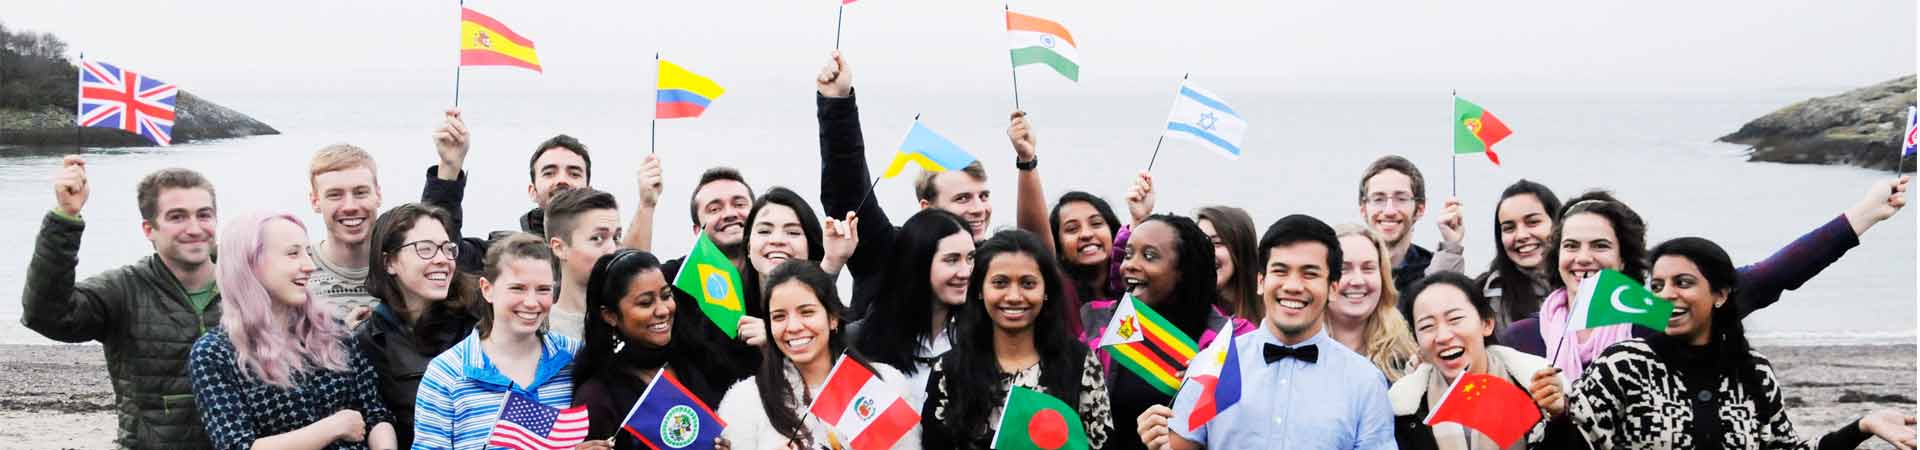 A group of international students waving flags showing their nationalities.